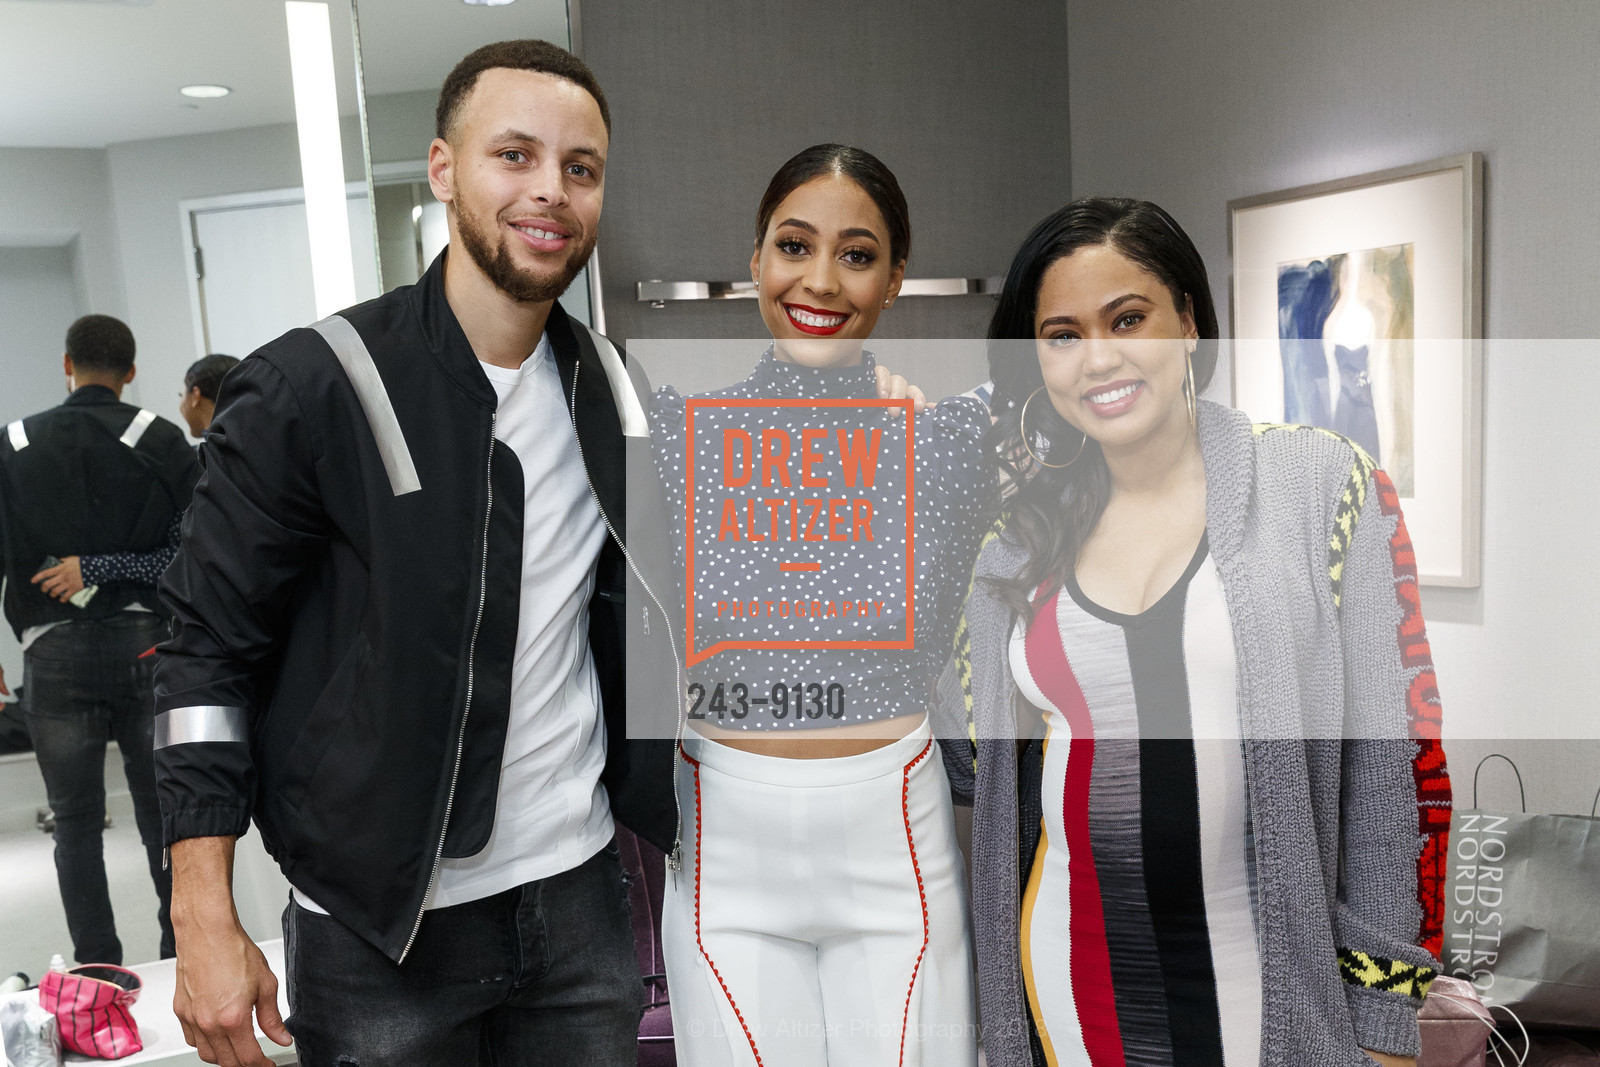 Stephen Curry, Sydel Curry, Ayesha Curry, Photo #243-9130